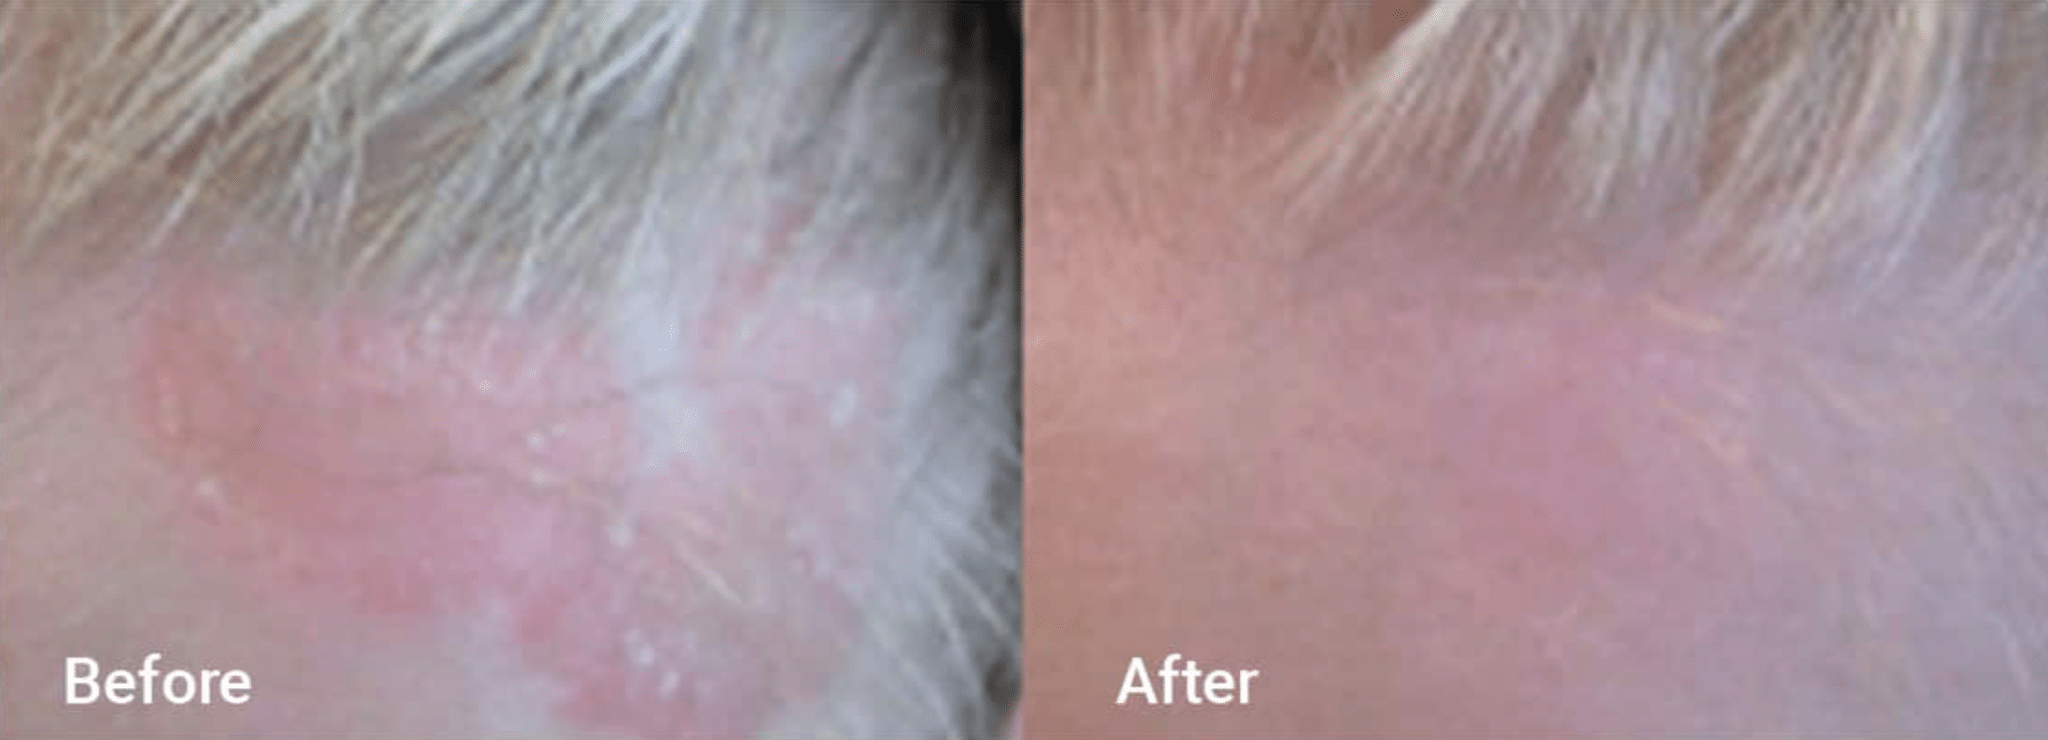 before & after image of psoriasis treatment on the forehead